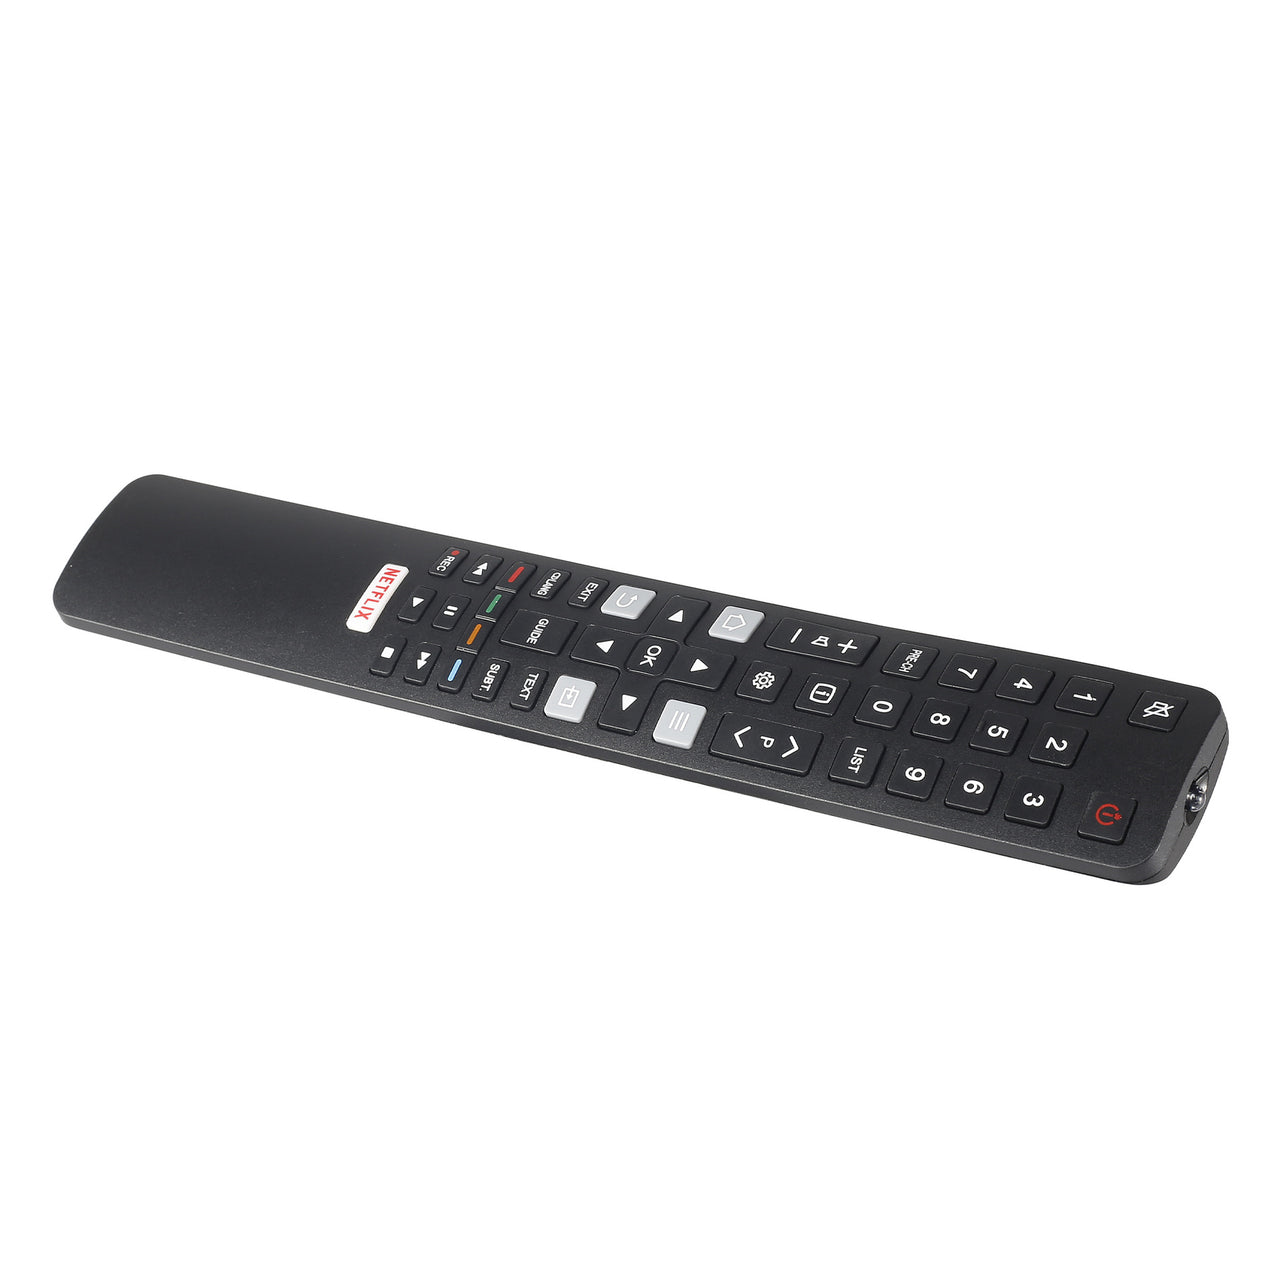 RC802N YAI2 Replacement Remote for FFALCON LED TVs